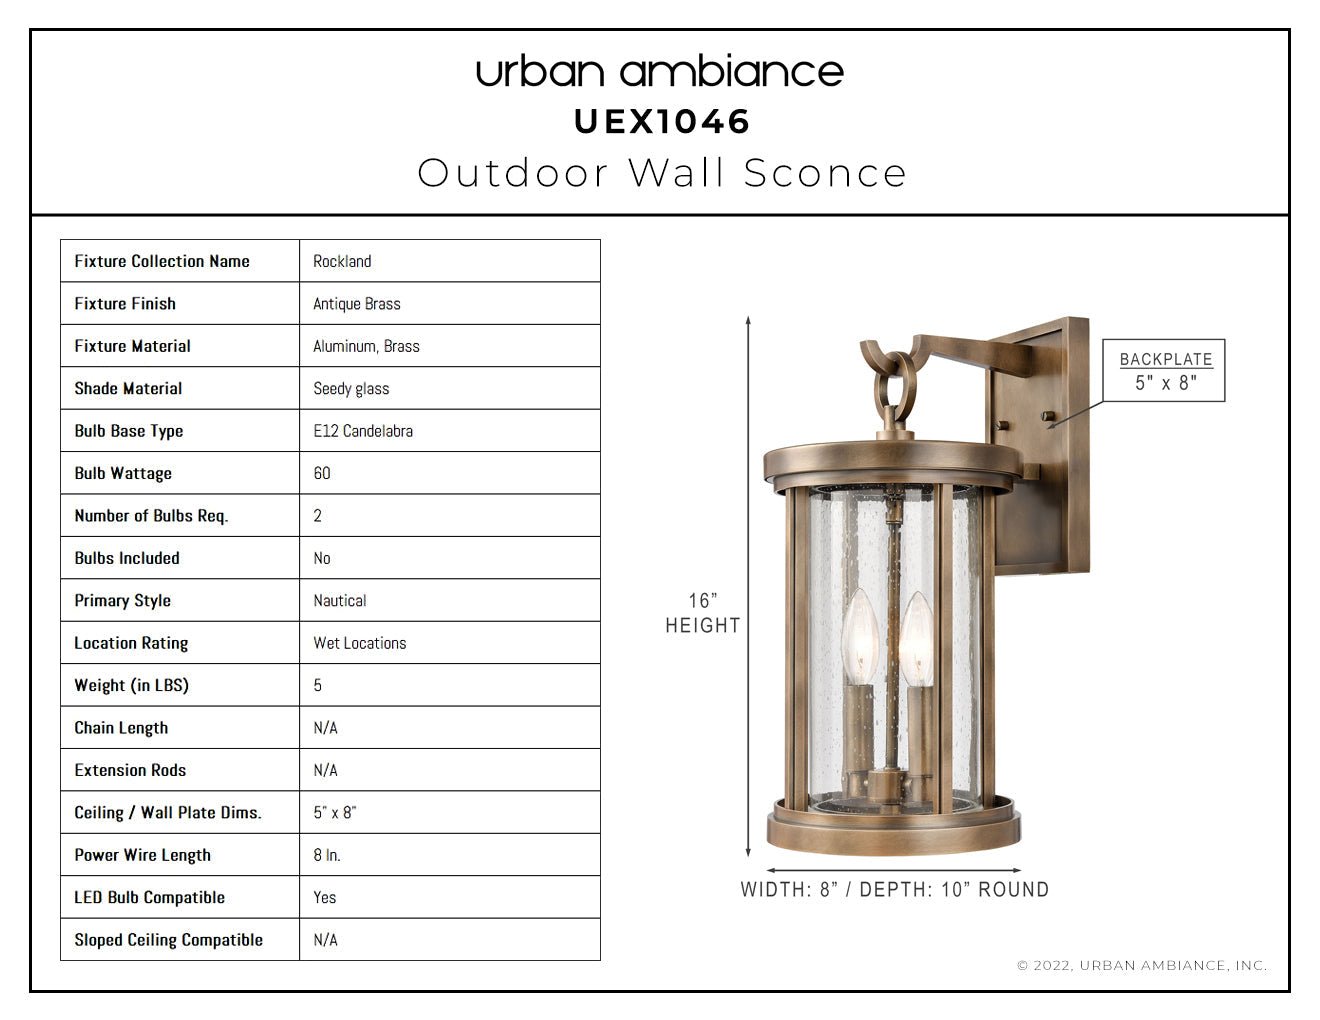 UEX1046 Nautical Outdoor Wall Sconce 16''H x 8''W, Antique Brass Finish,  Rockland Collection